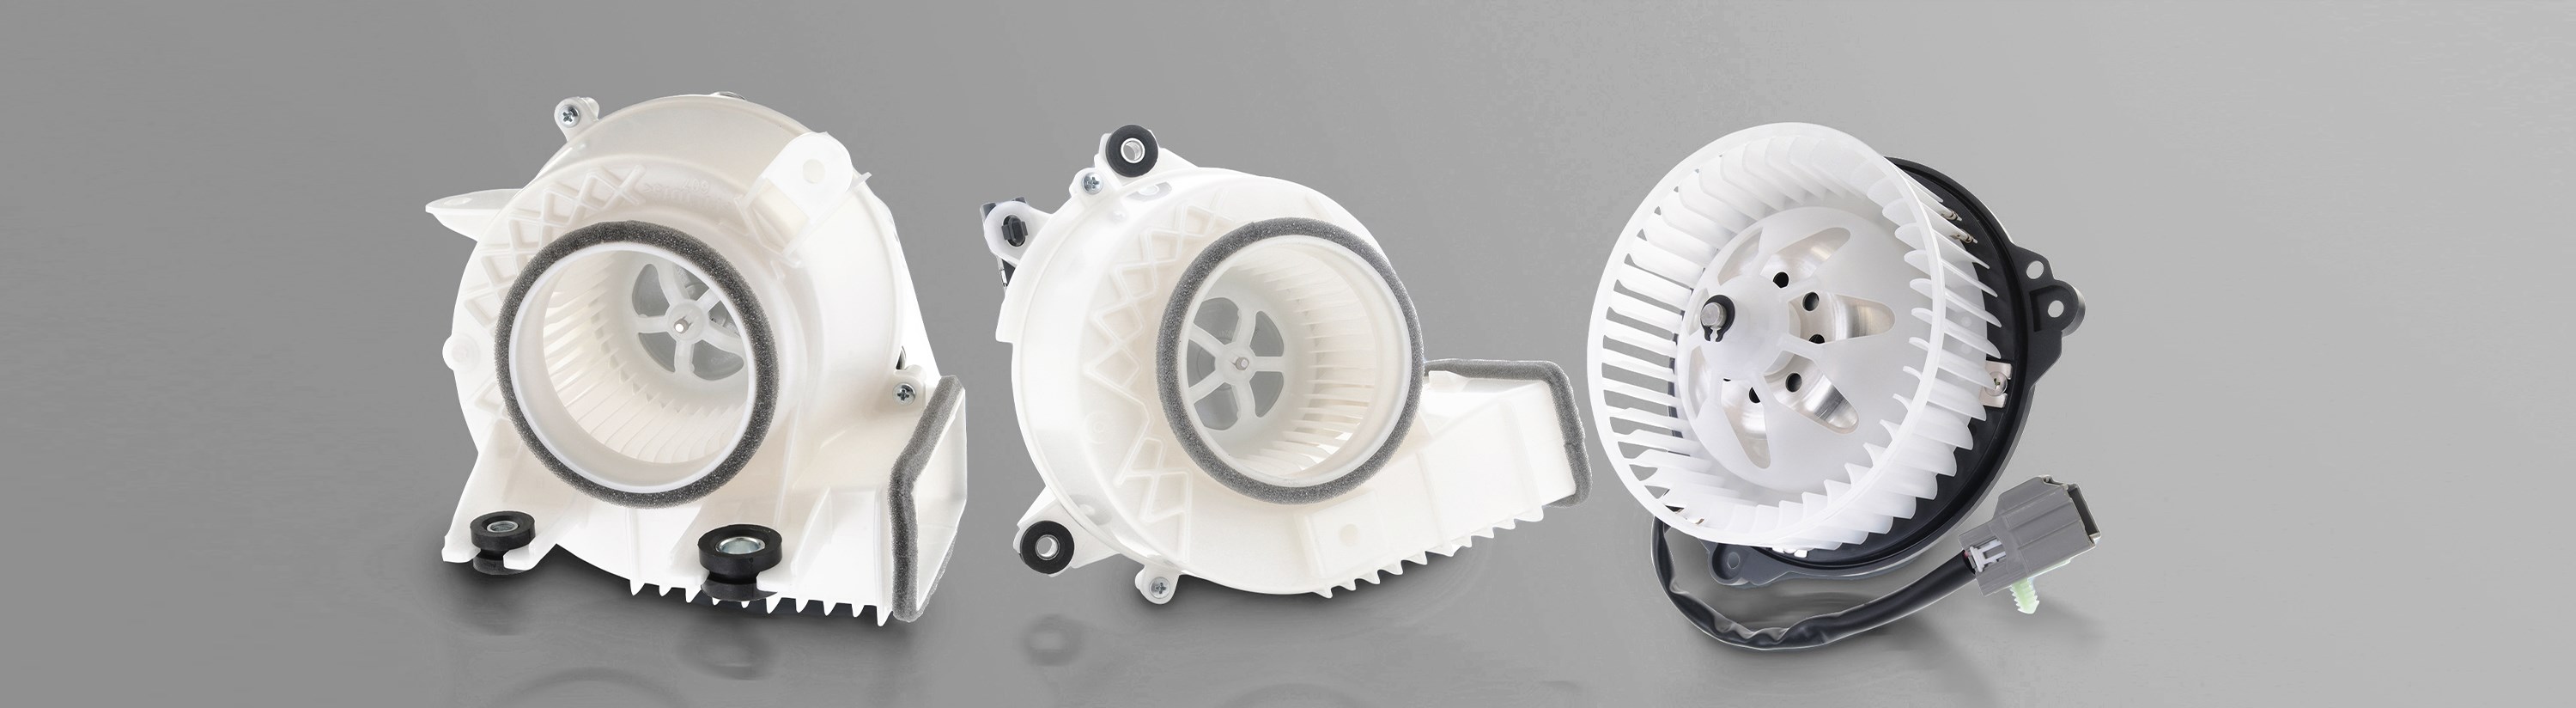 Continental-Hybrid-Battery-Cooling-Fan-Expansion-Header